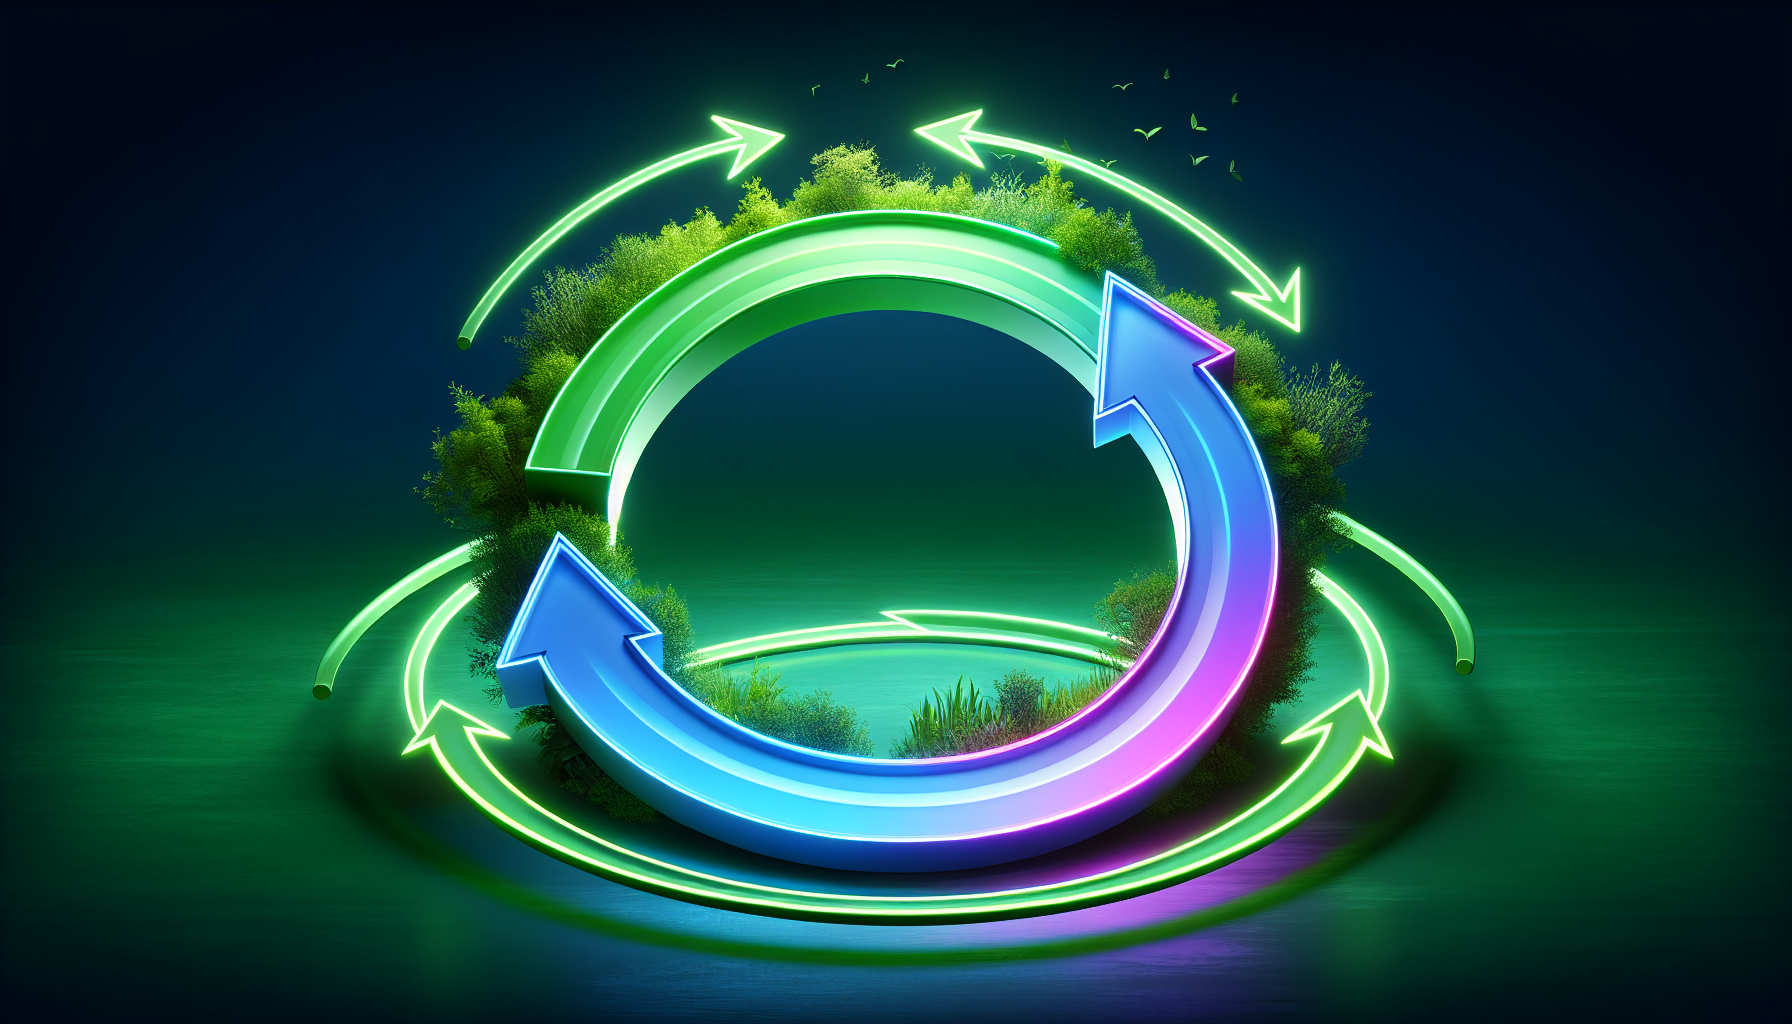 Illustration of a circular loop symbolizing sustainable growth